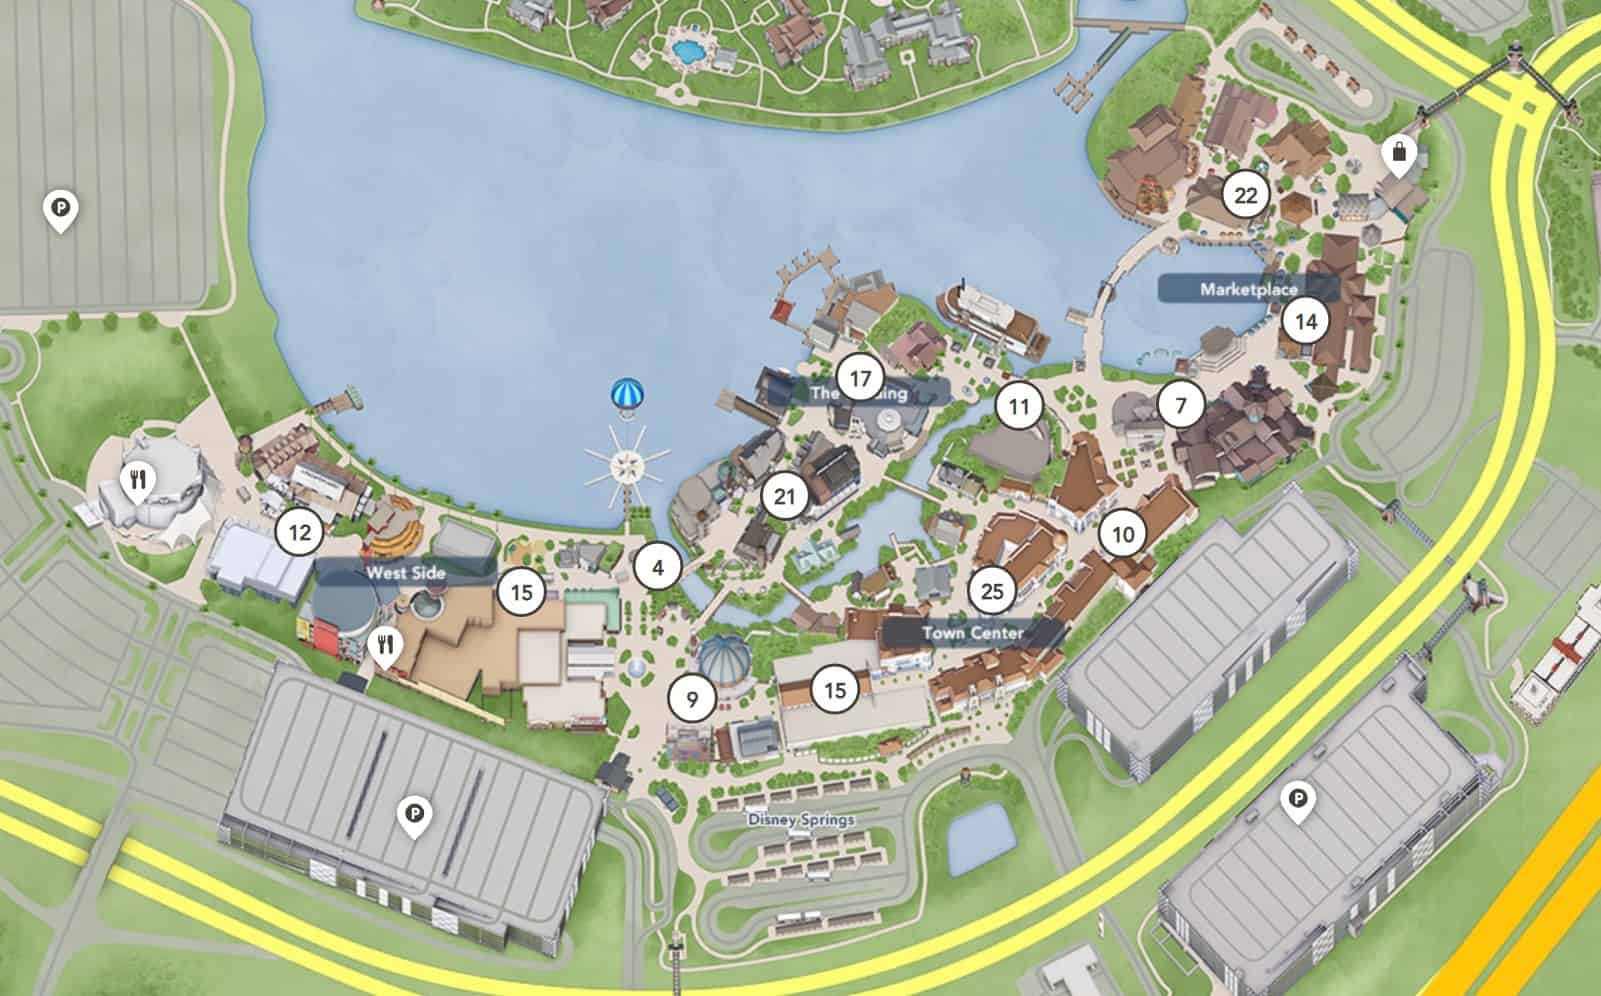 map of Disney Springs Orlando with town center, west side,,landing, and marketplace